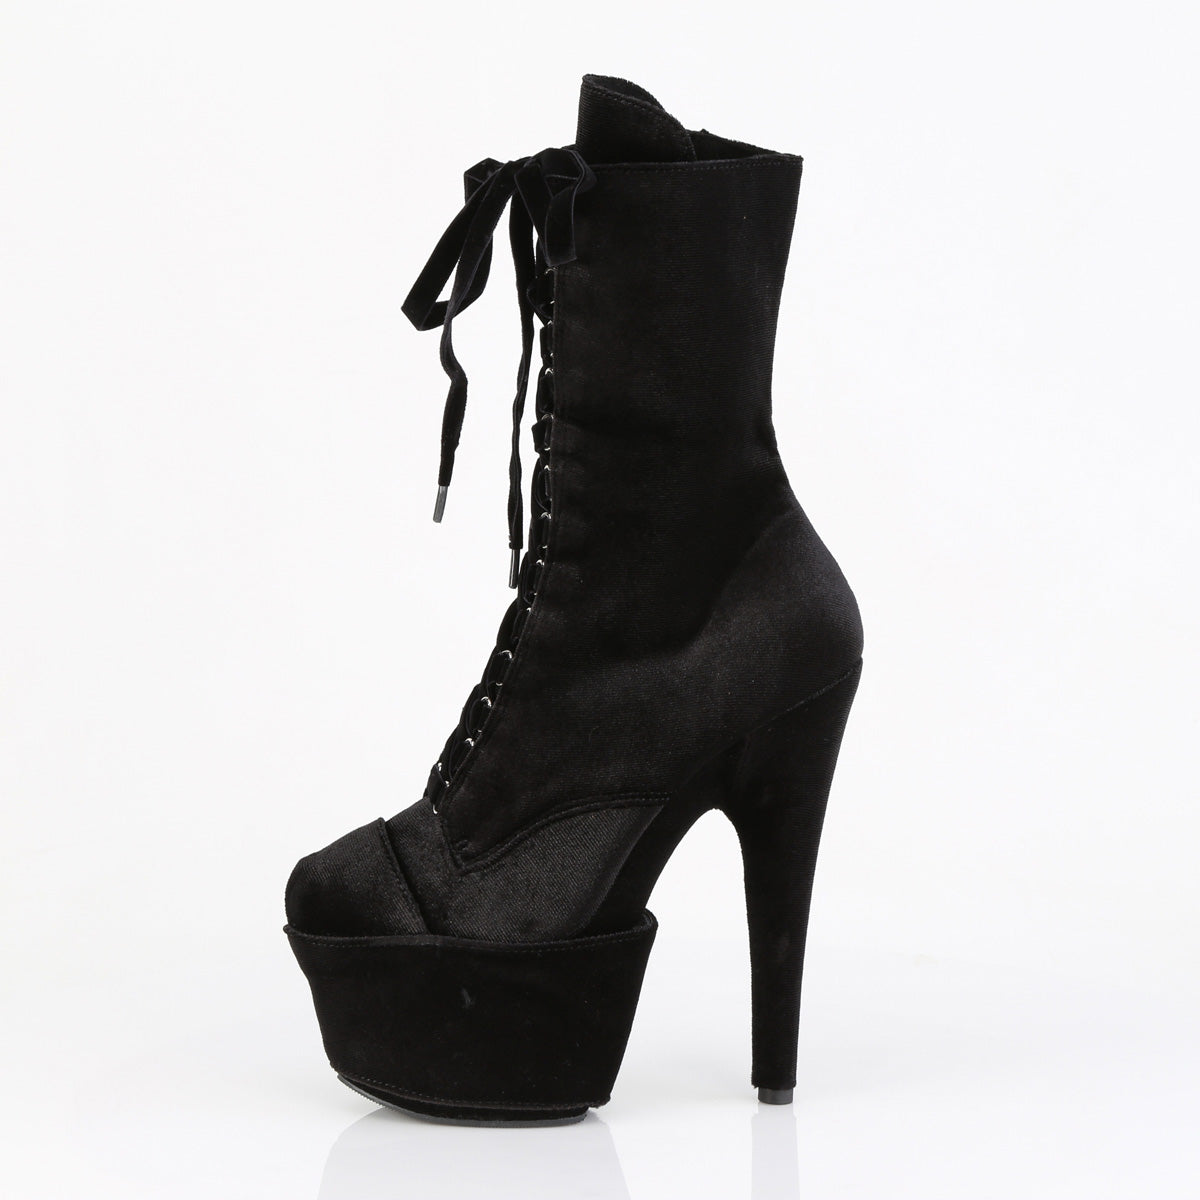 ADORE-1045VEL Velvet Lace-Up Ankle Boot Black Multi view 4